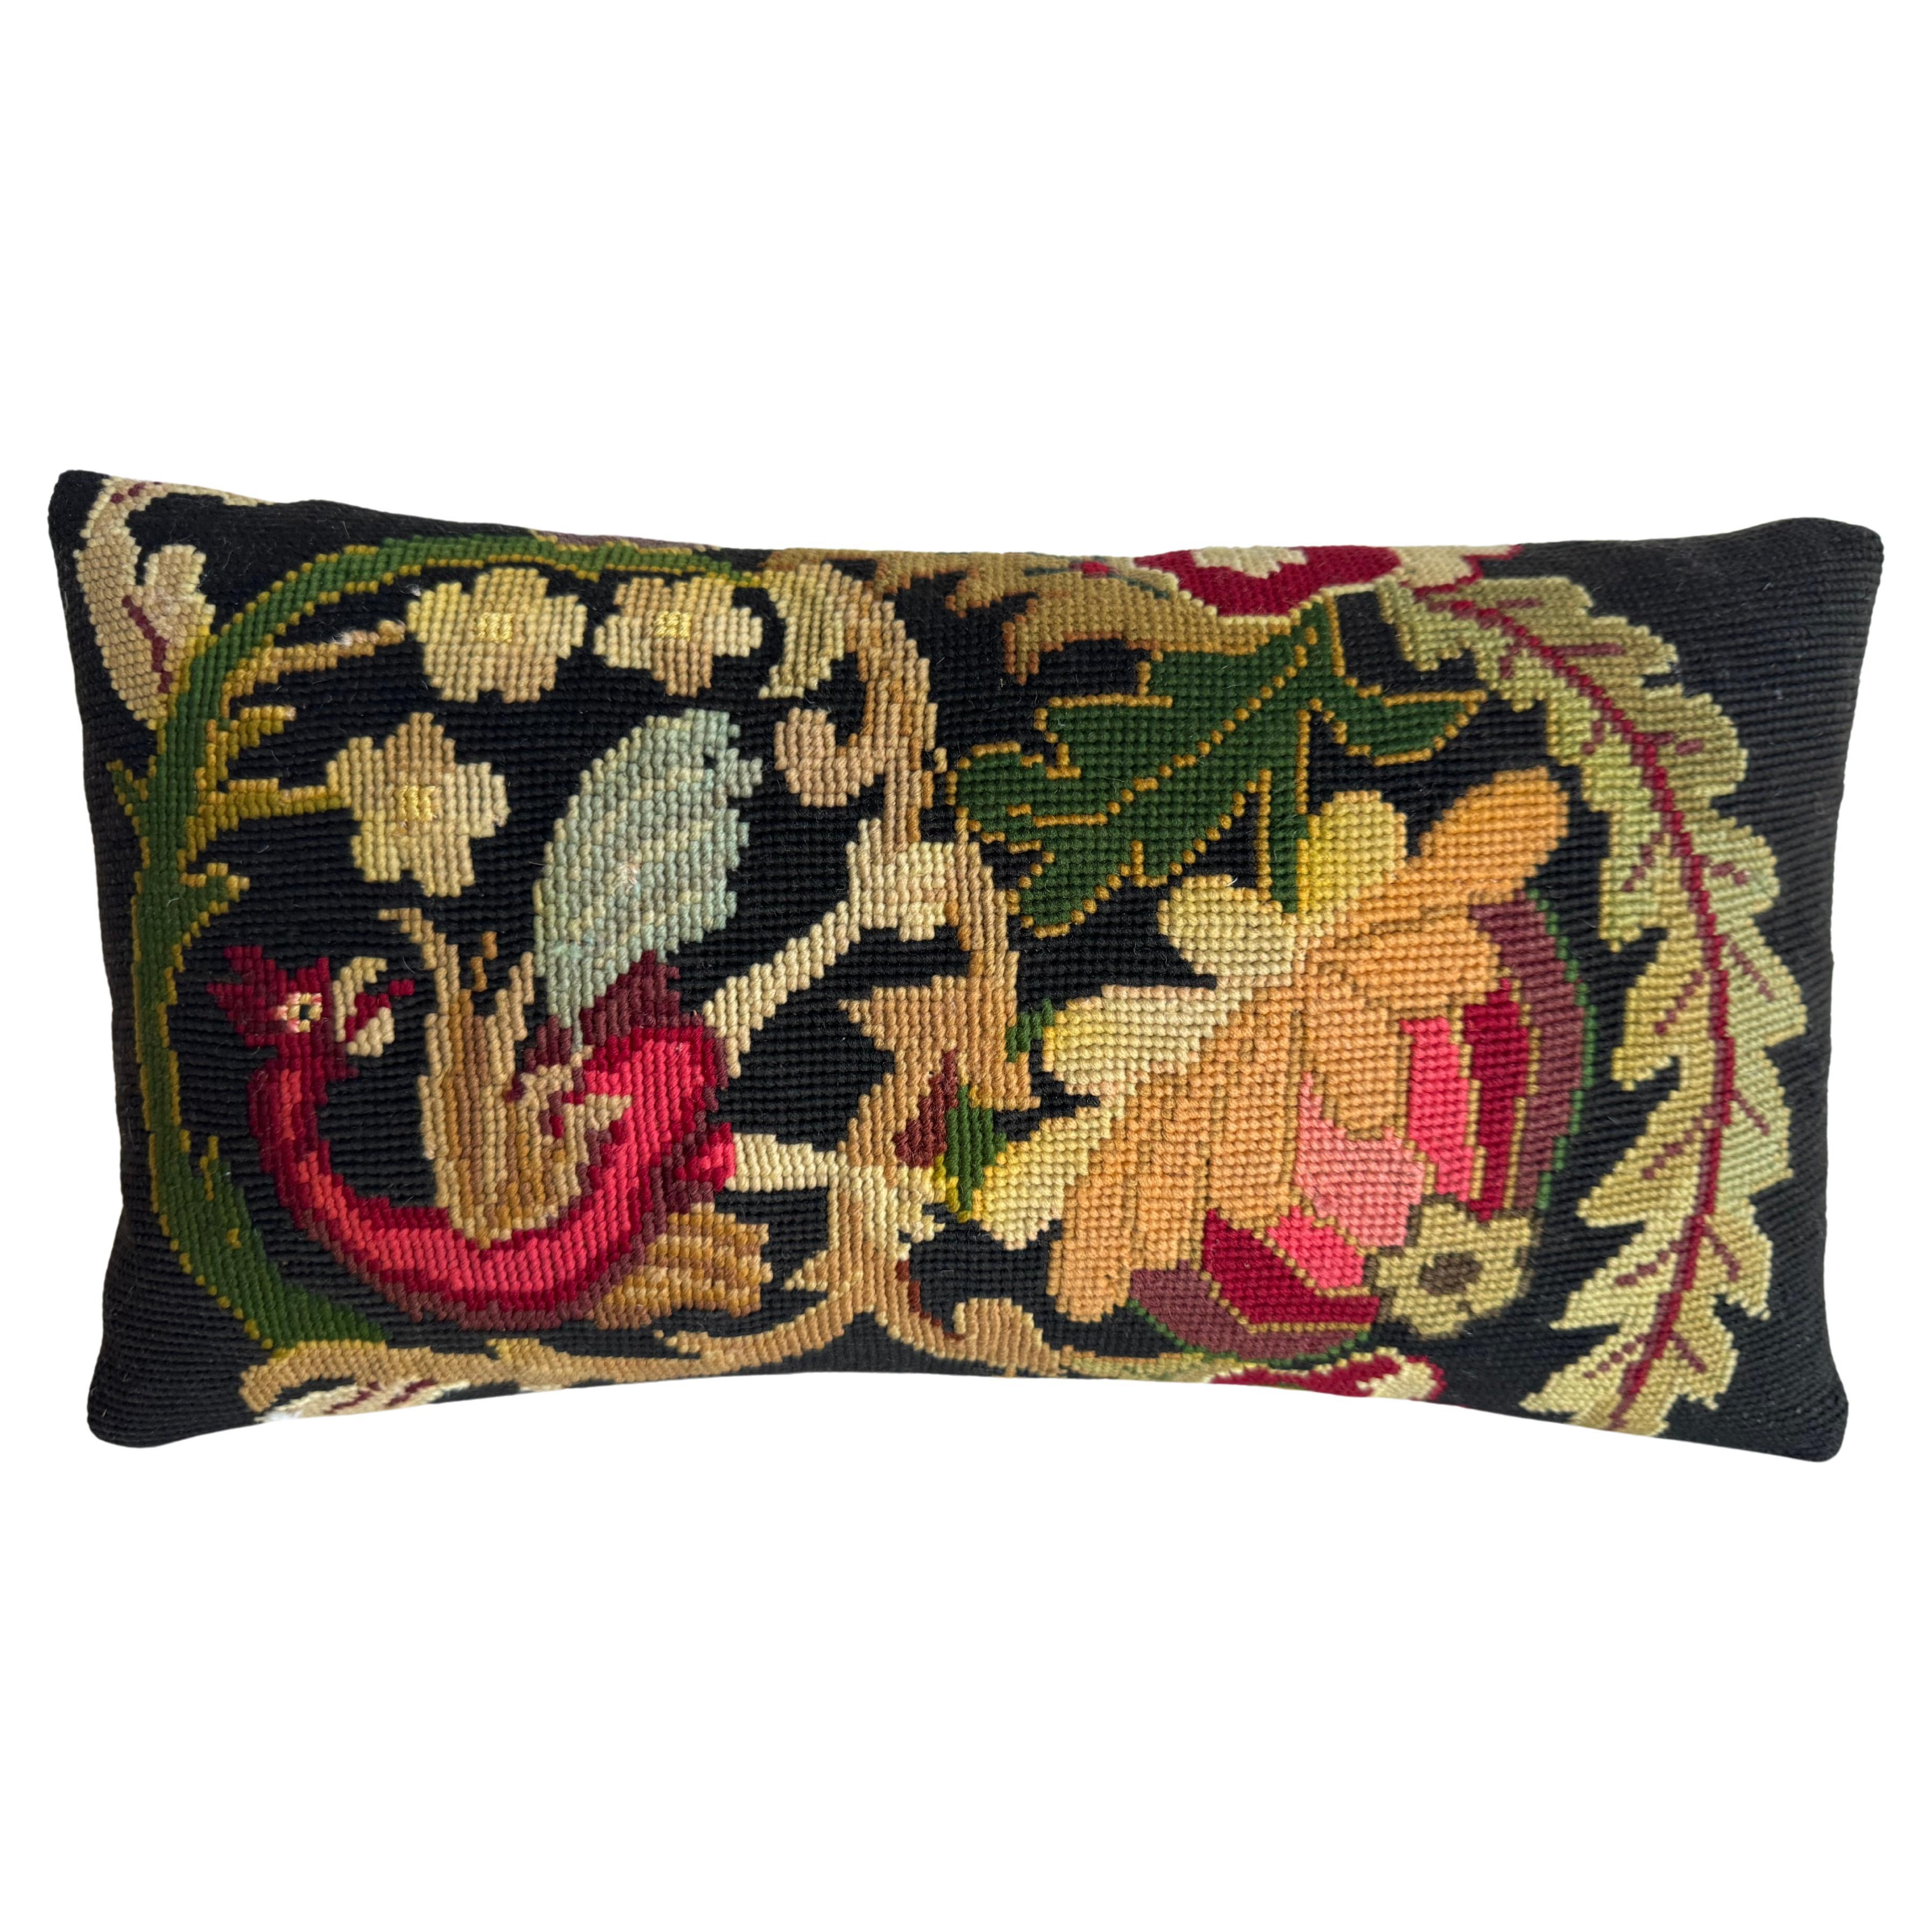 1850 English Needle Work Pillow - 15"X 8' For Sale